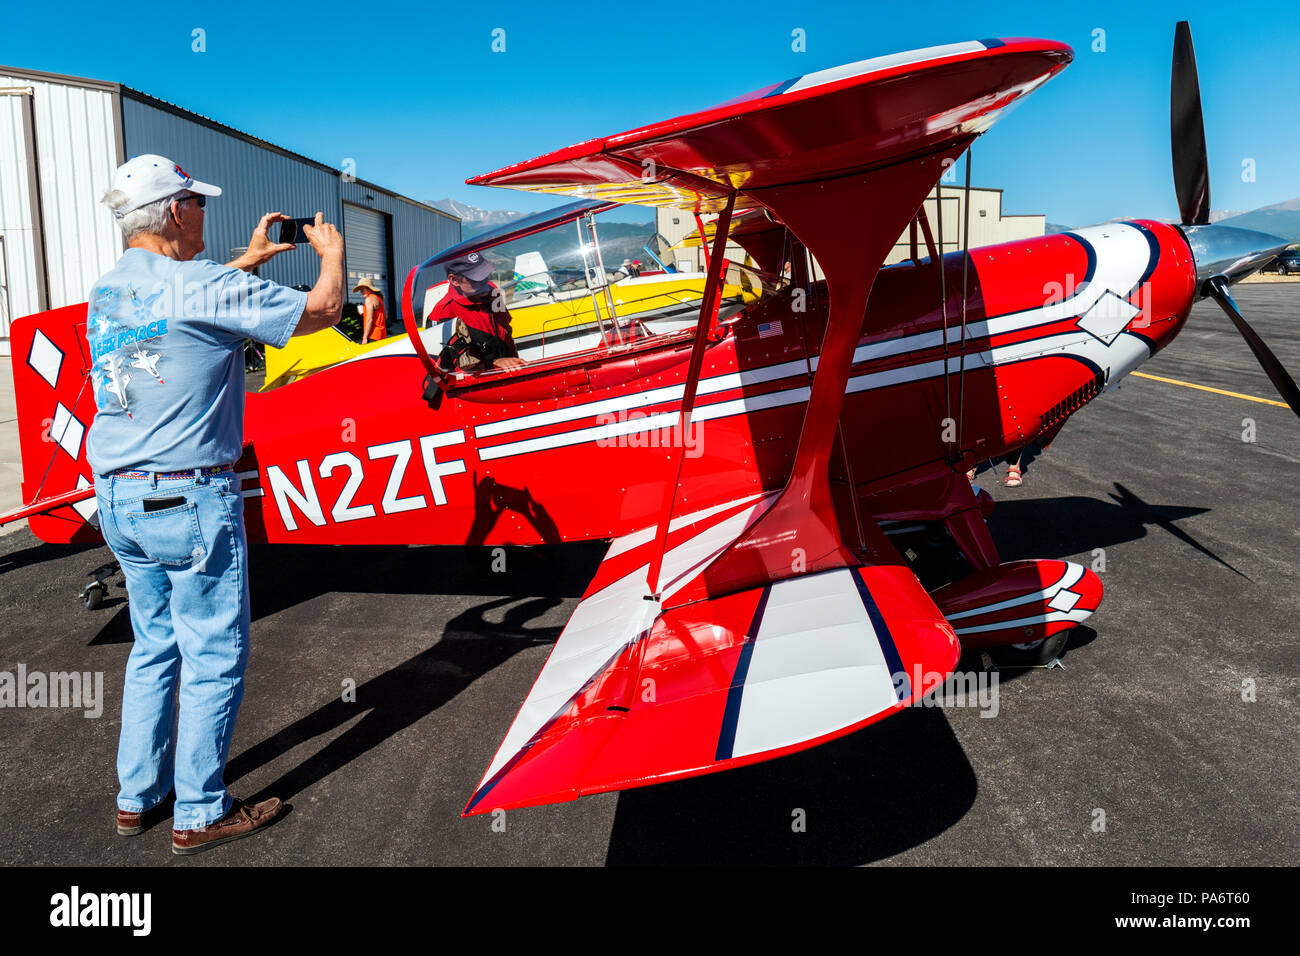 Visitor photographing Pitts Special S2C biplane; Salida Fly-in & Air Show; Salida; Colorado; USA Stock Photo